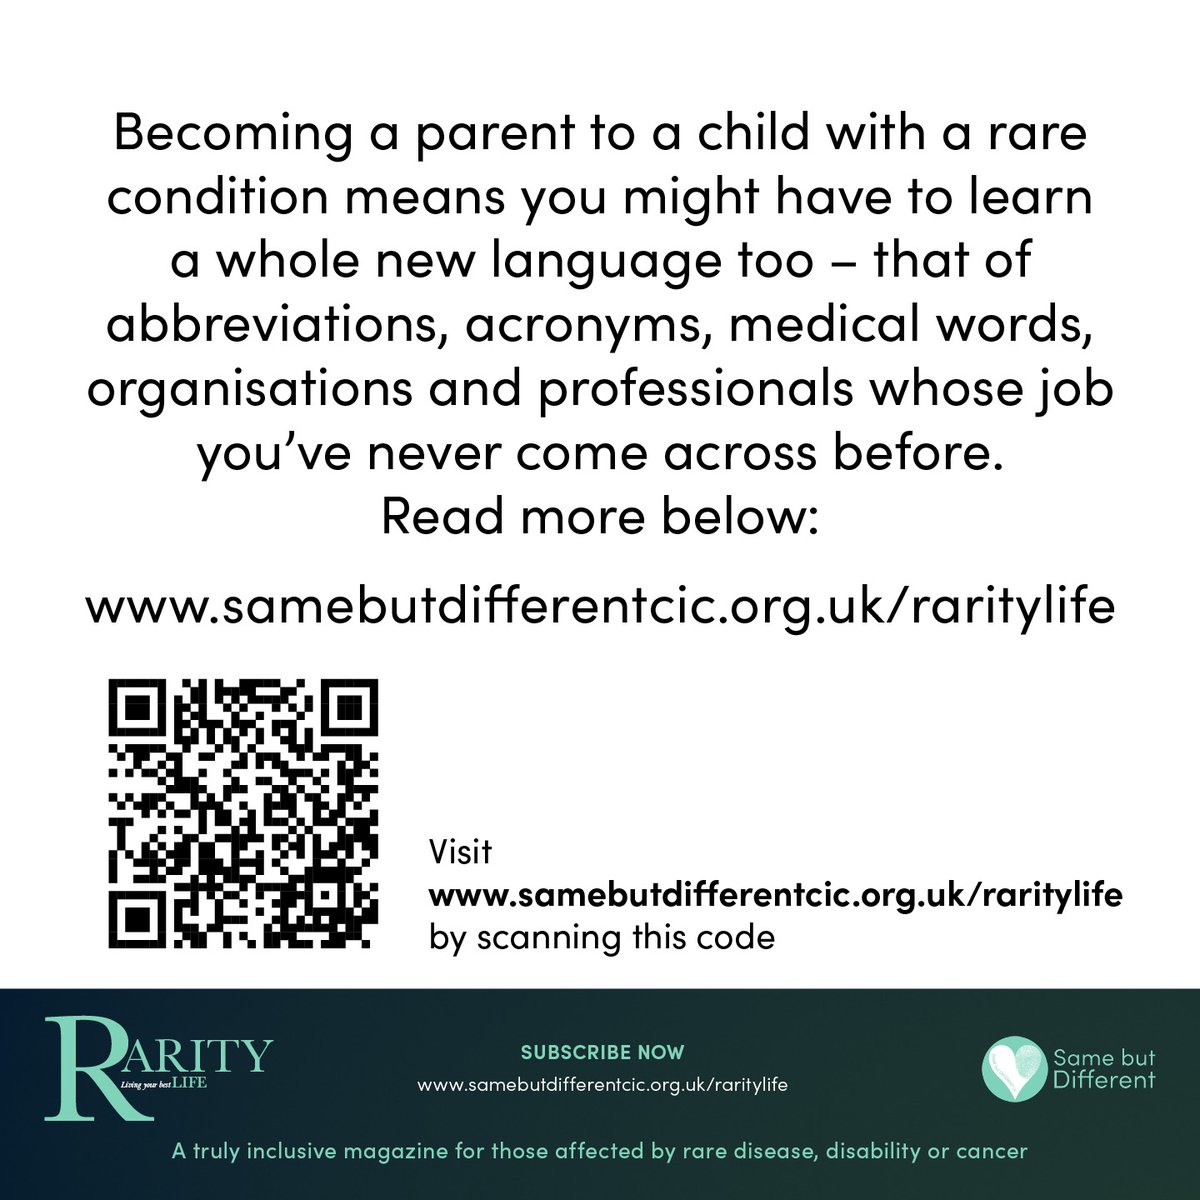 Have a child with a rare condition? You might have to learn a whole new language, see our guide here samebutdifferentcic.org.uk/raritylife #raredisease #disabledvoices #specialneeds #learningdisability #languagematters #acronyms #abbreviations #medicaljargon #inclusionmatters #nationallottery